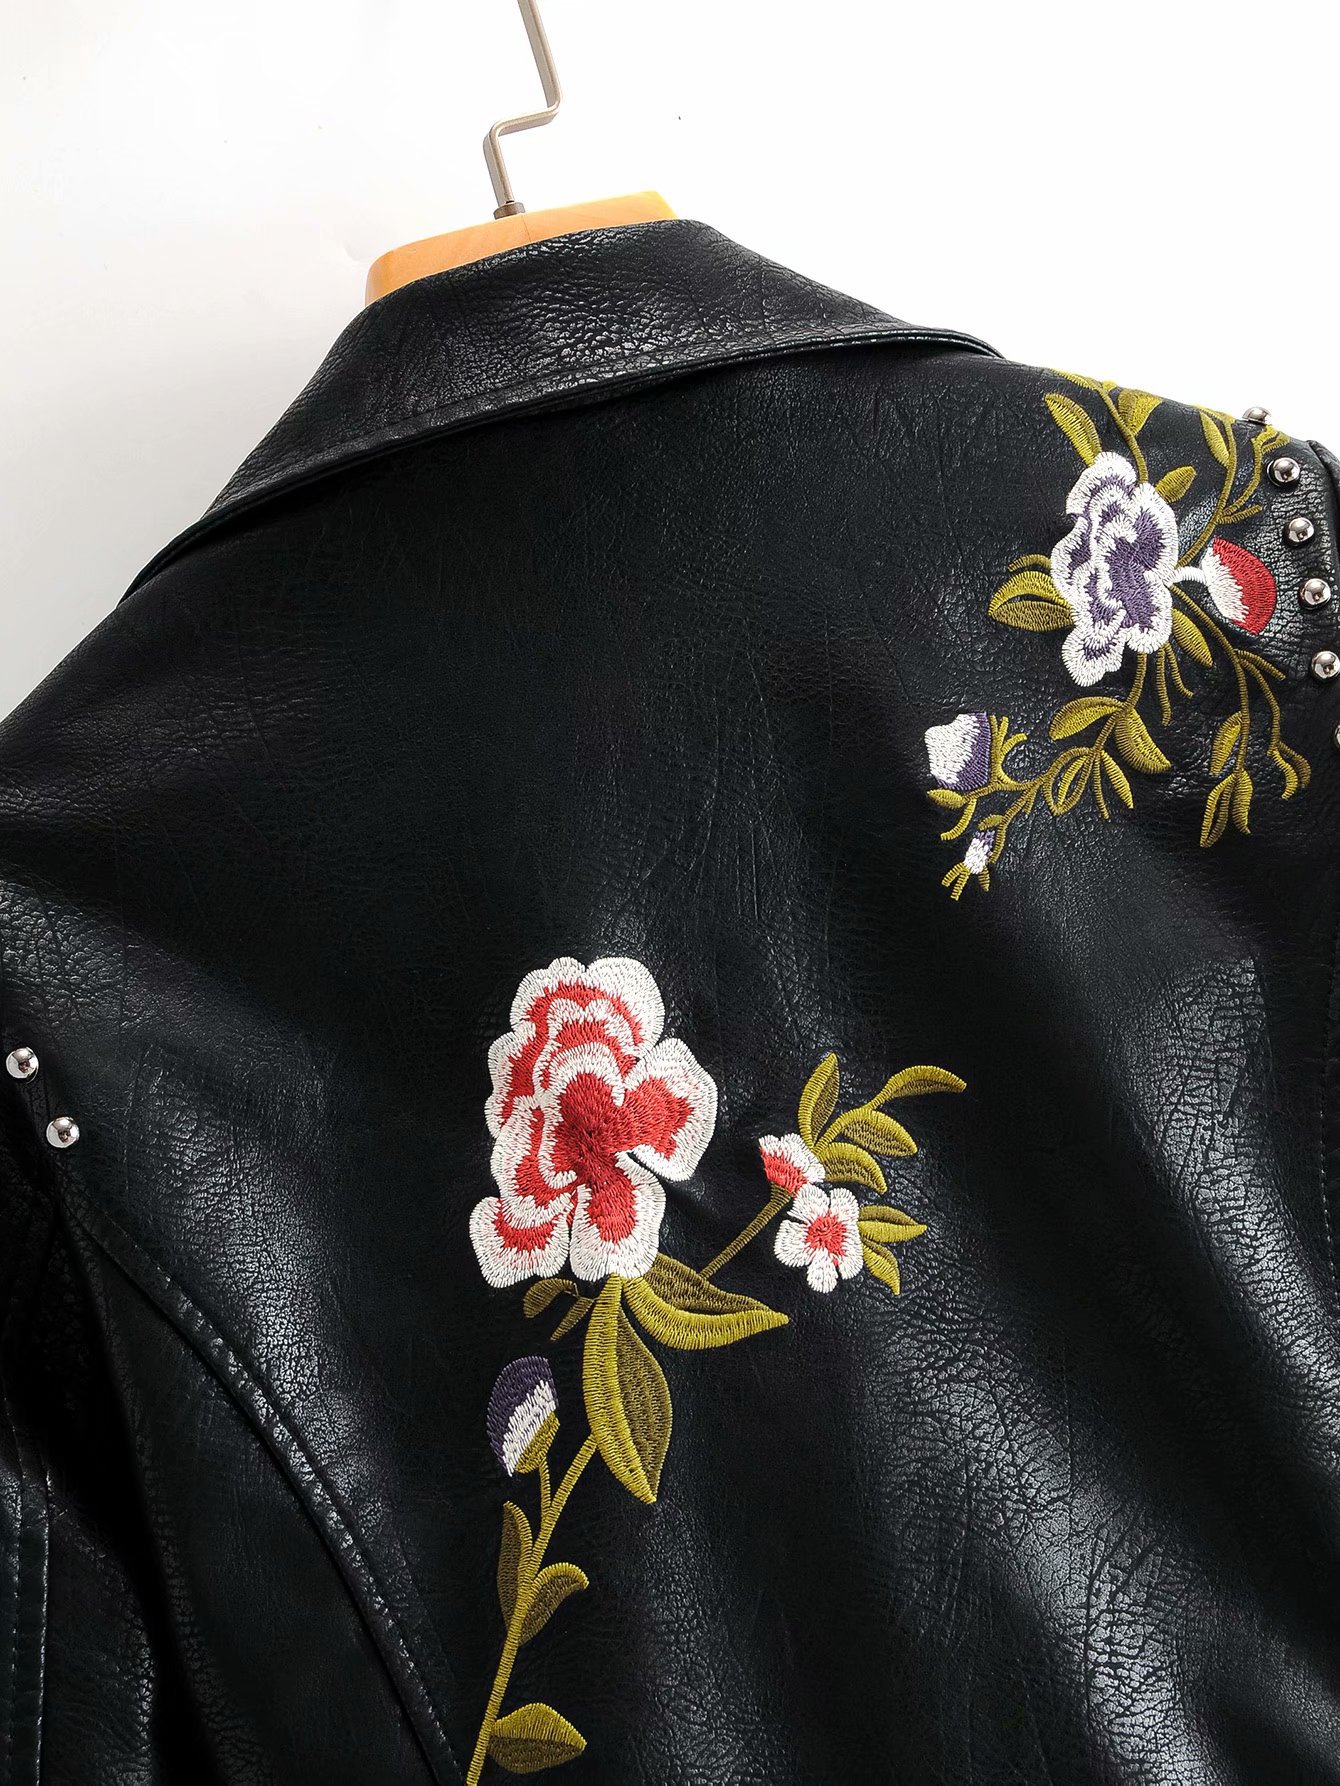 Long-Sleeved Lapel Floral Embroidery Pu Leather Jacket NSXFL101419